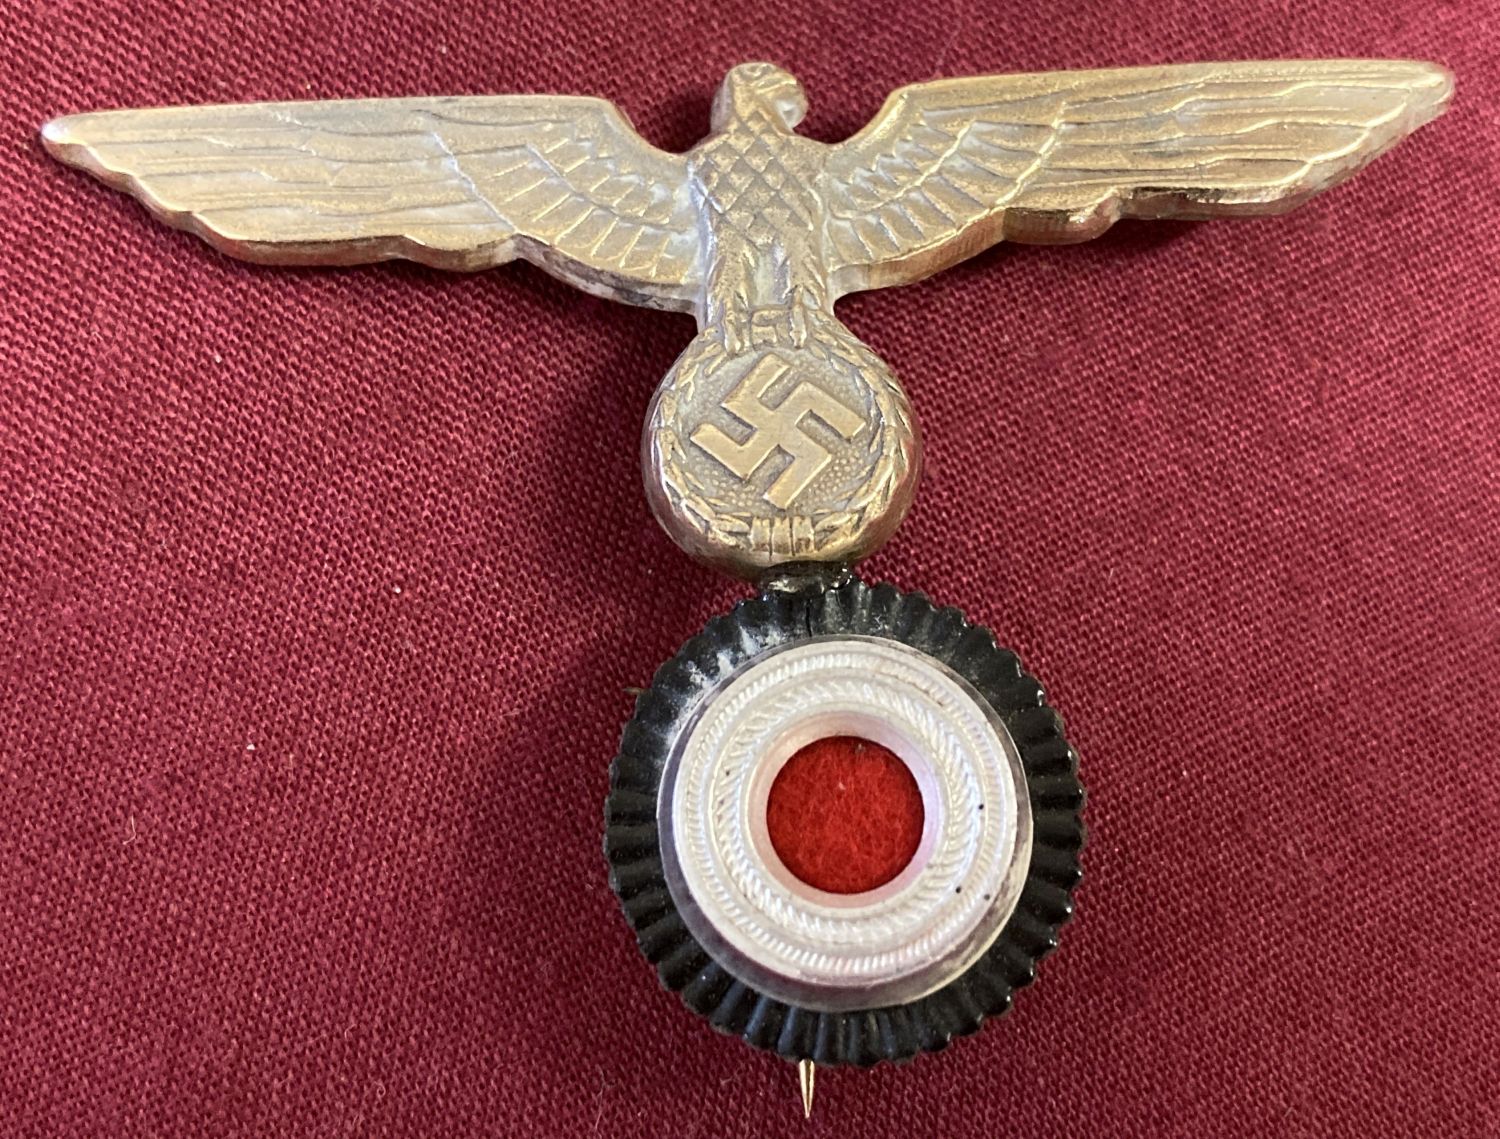 A WWII style Kriegsmarine "Donald Duck" naval hat badge (a/f).